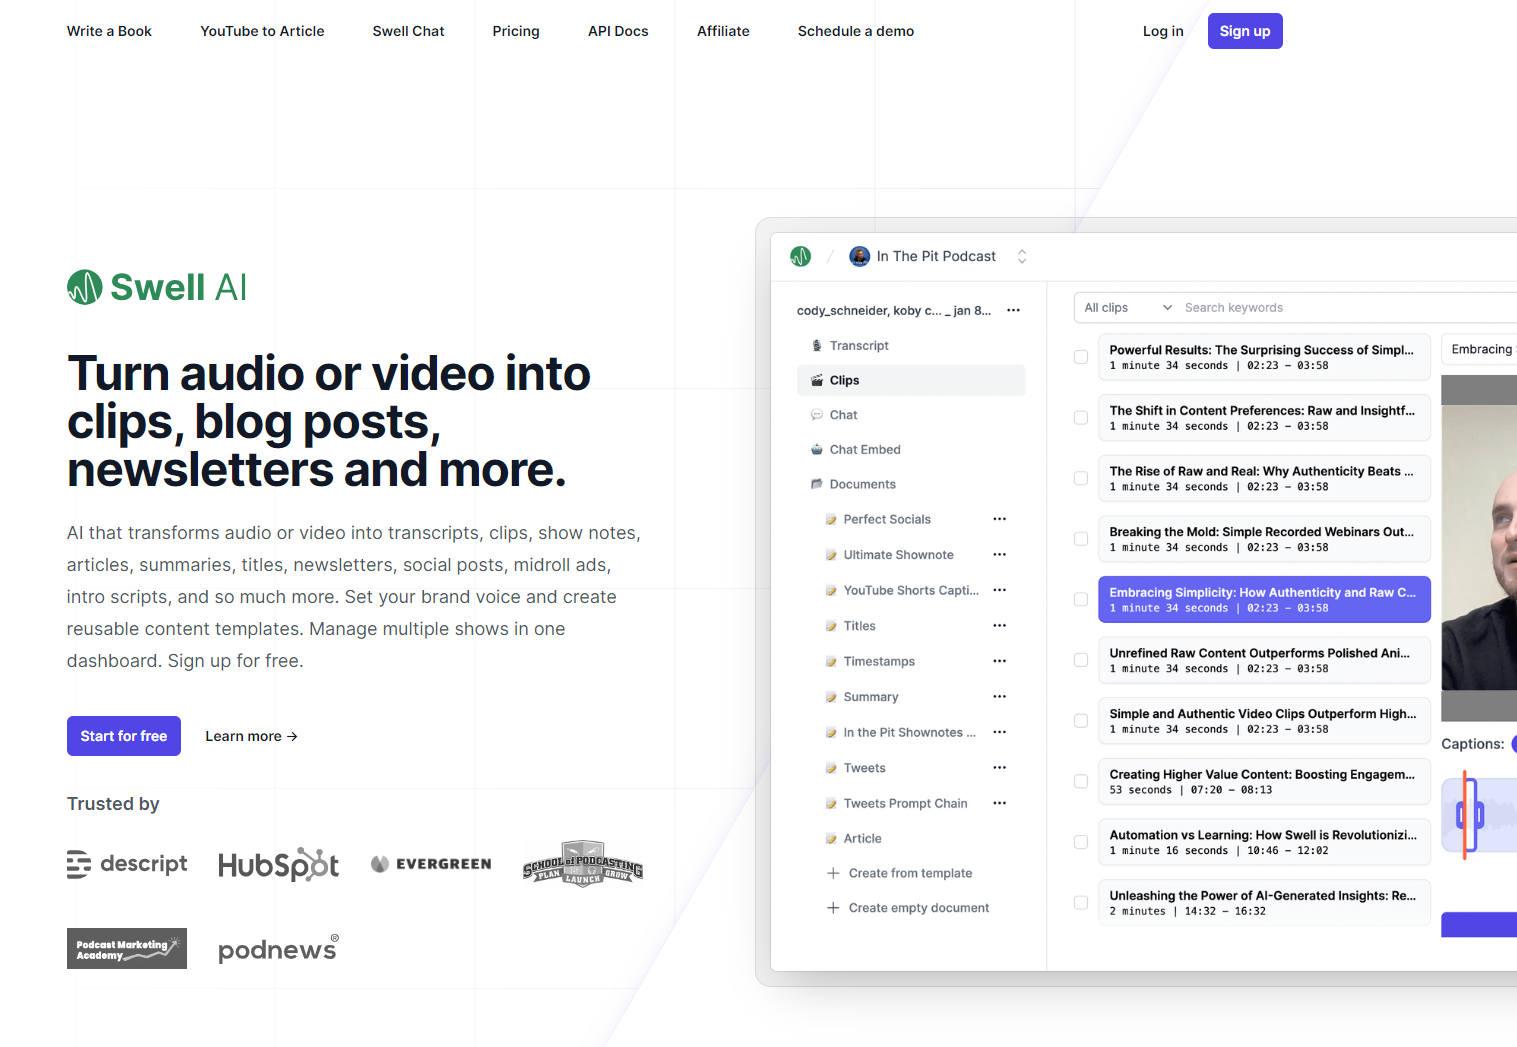 Swell AI Turn audio or video into clips, blog posts, newsletters and more